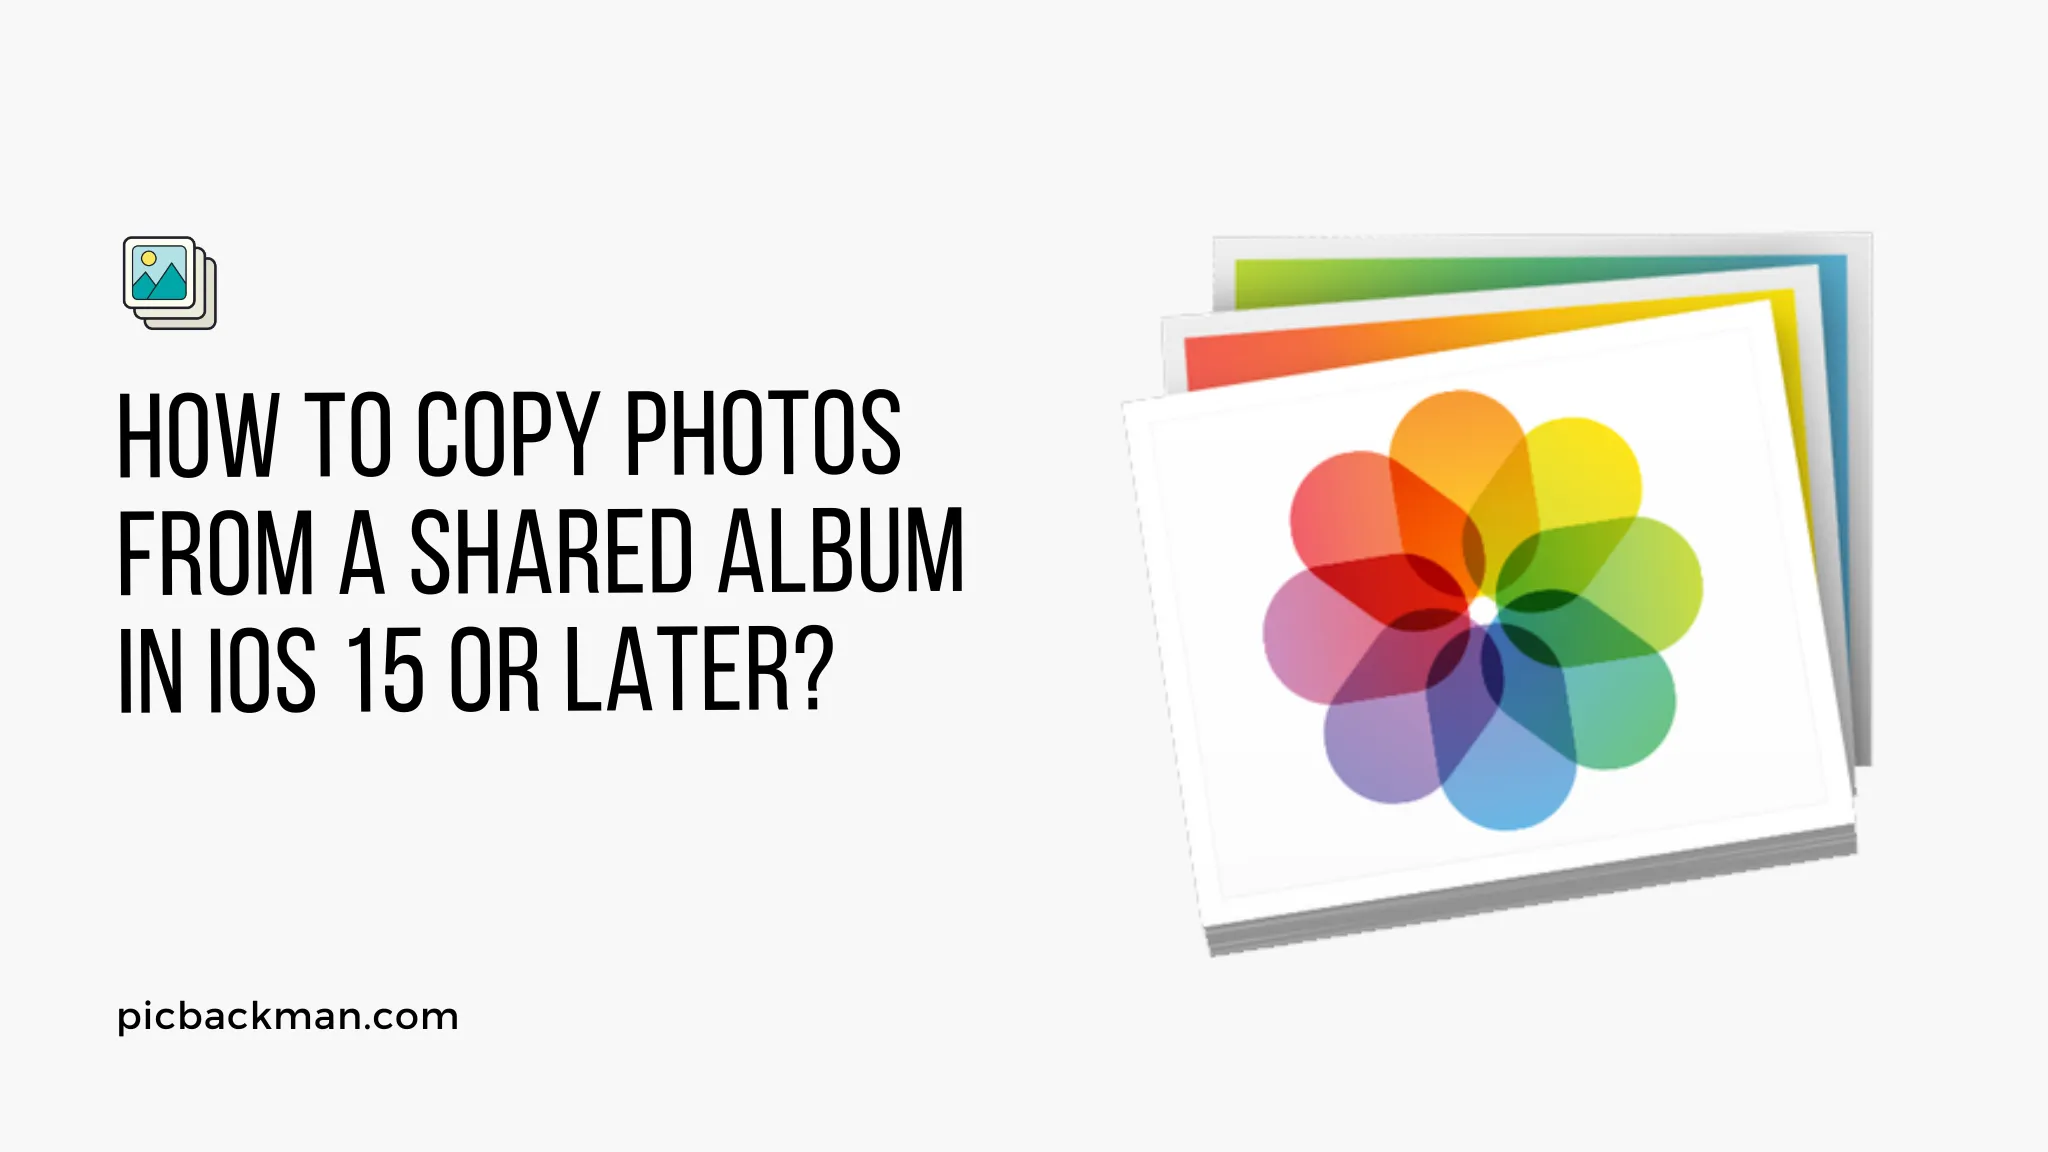 How to Copy Photos from a Shared Album in iOS 15 or Later?